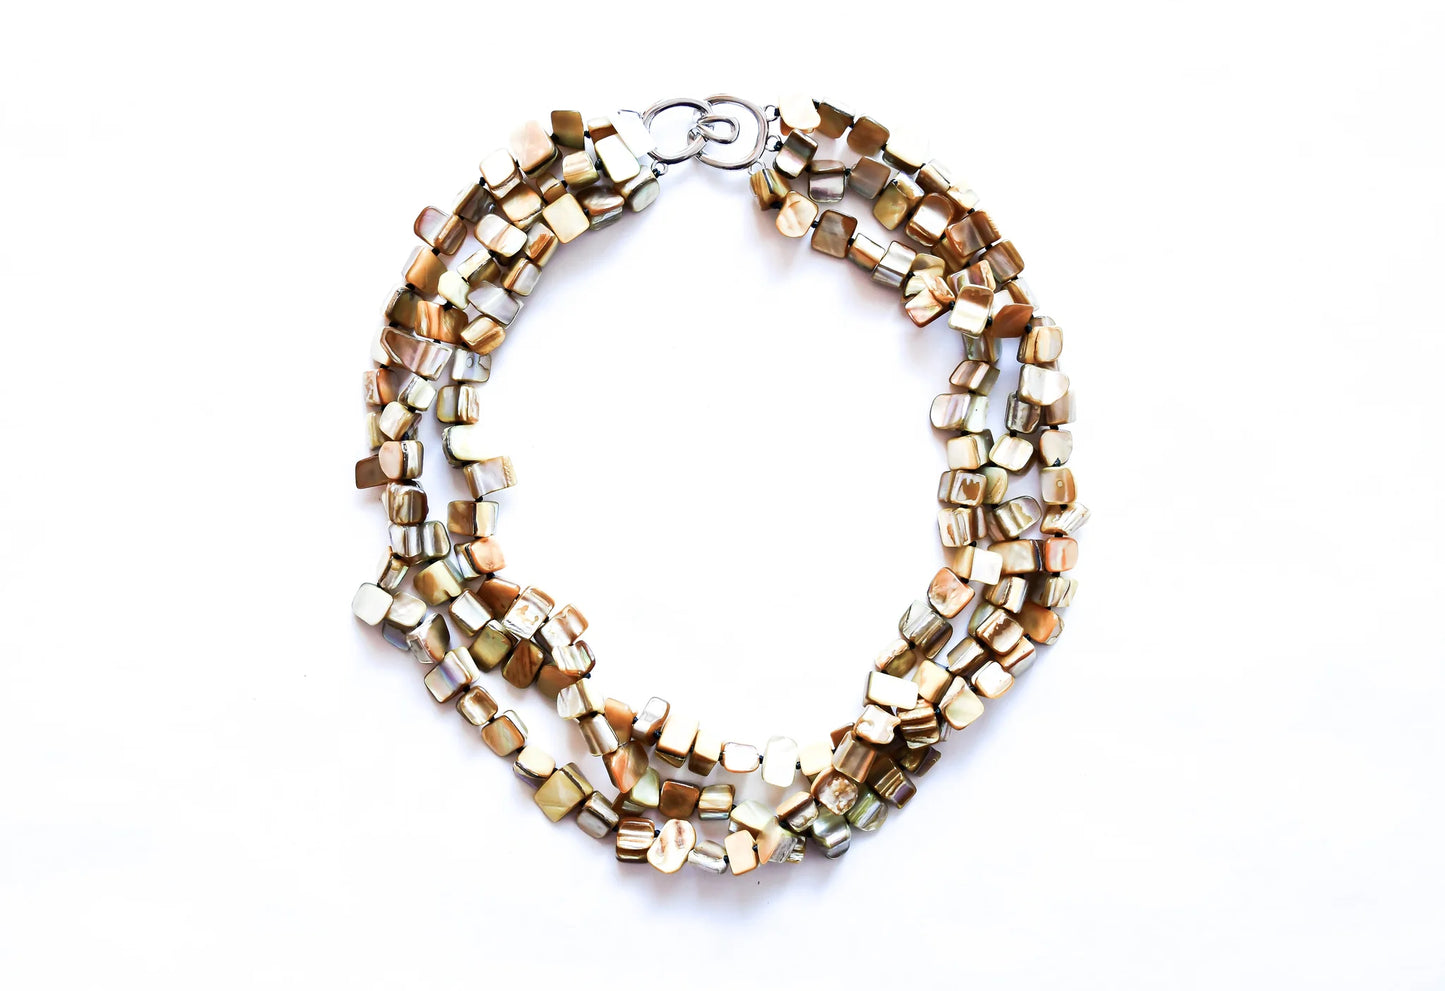 SEA LILY PEARL BEIGE NUGGET 3 STRAND NECKLACE - 252101C